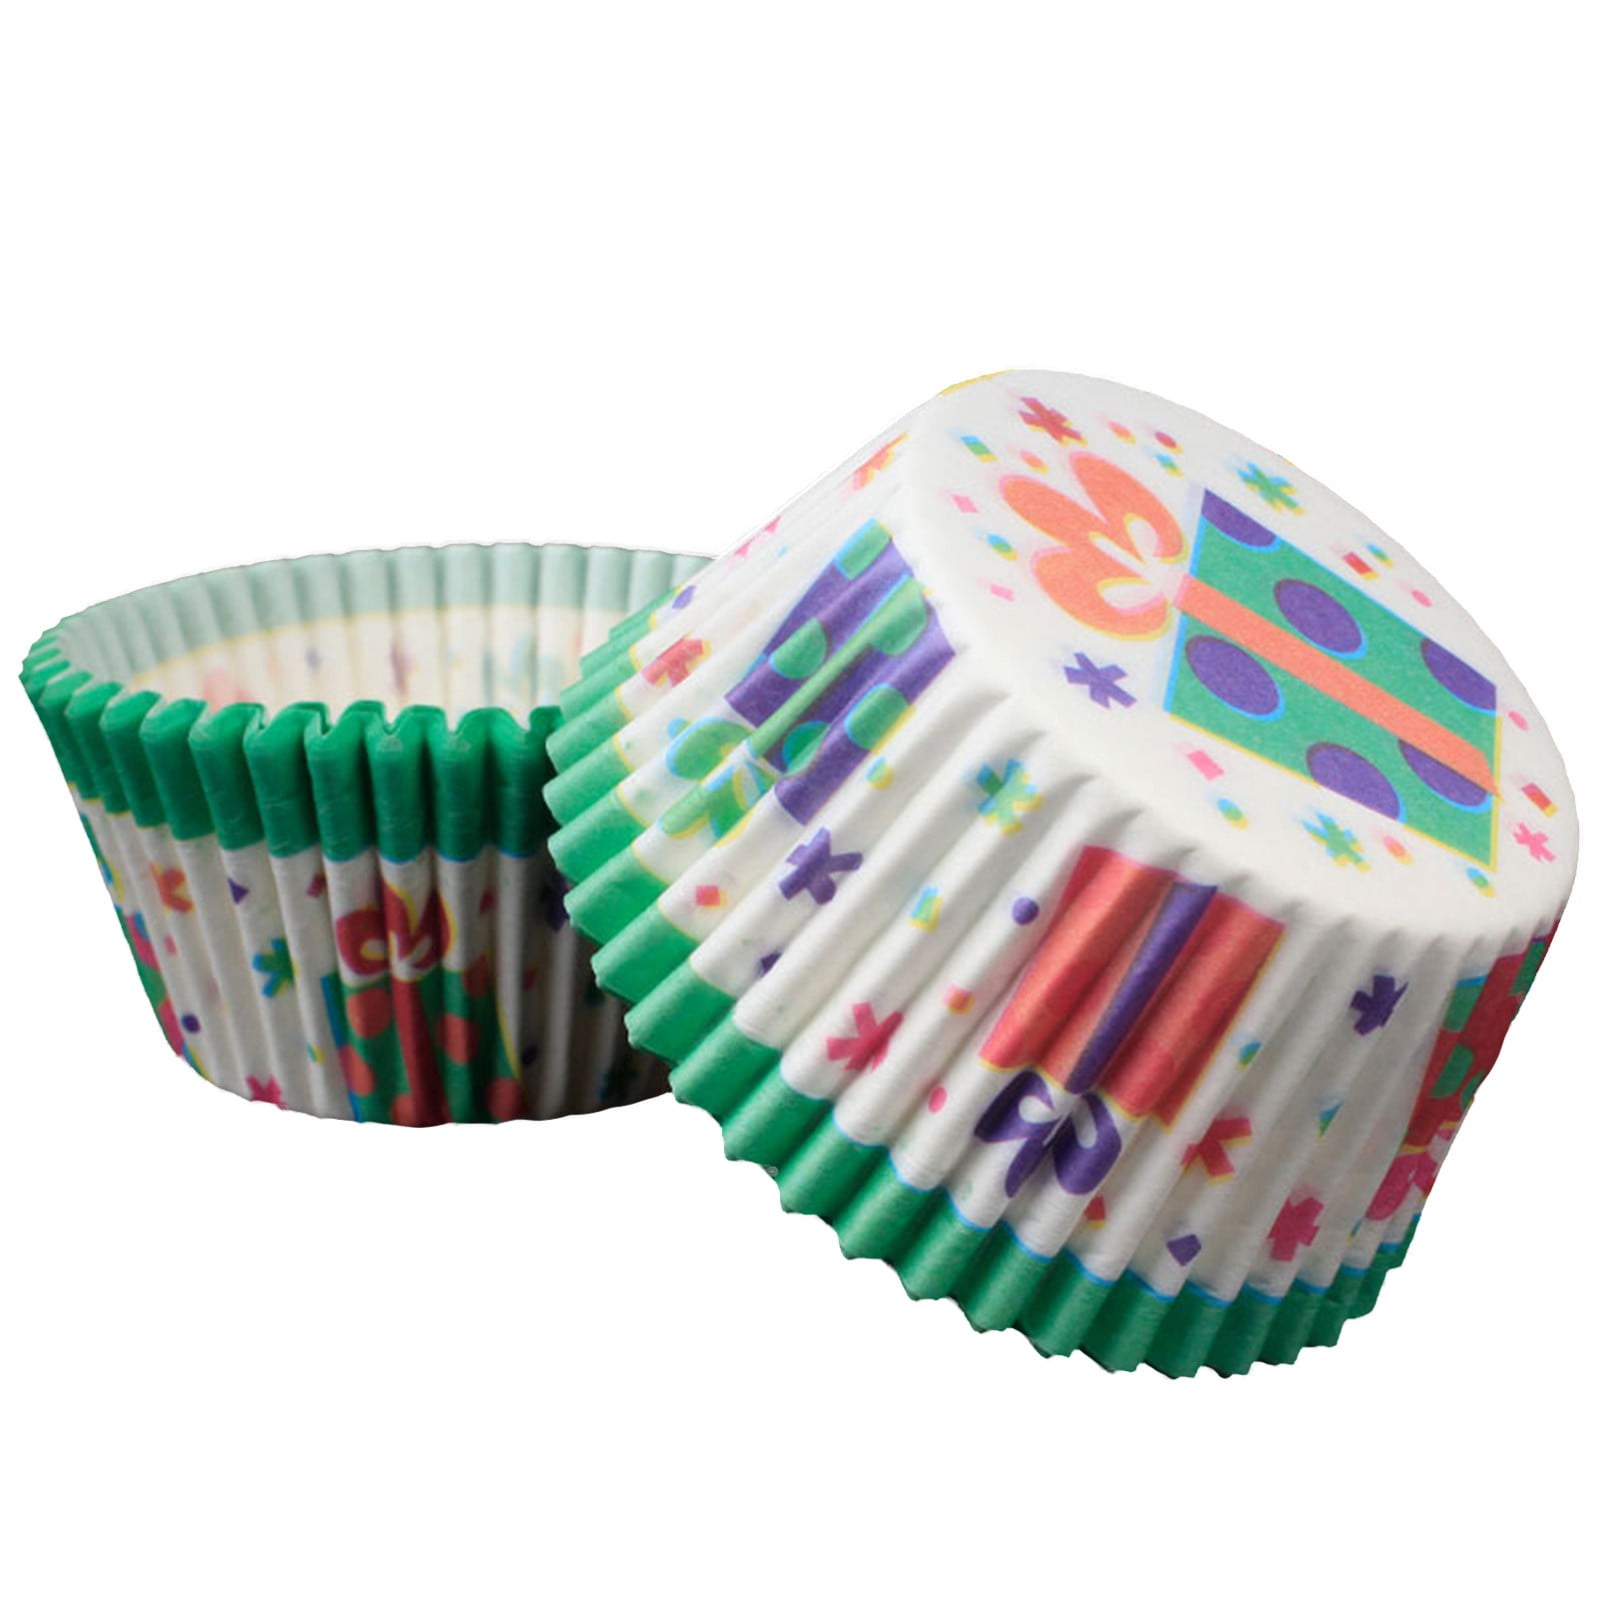 Mackur Baking Utensils Muffin Oil-Proof Chocolate Cake Paper Cup Rainbow Cup Case for Wedding Party Birthday 95-100 pcs 